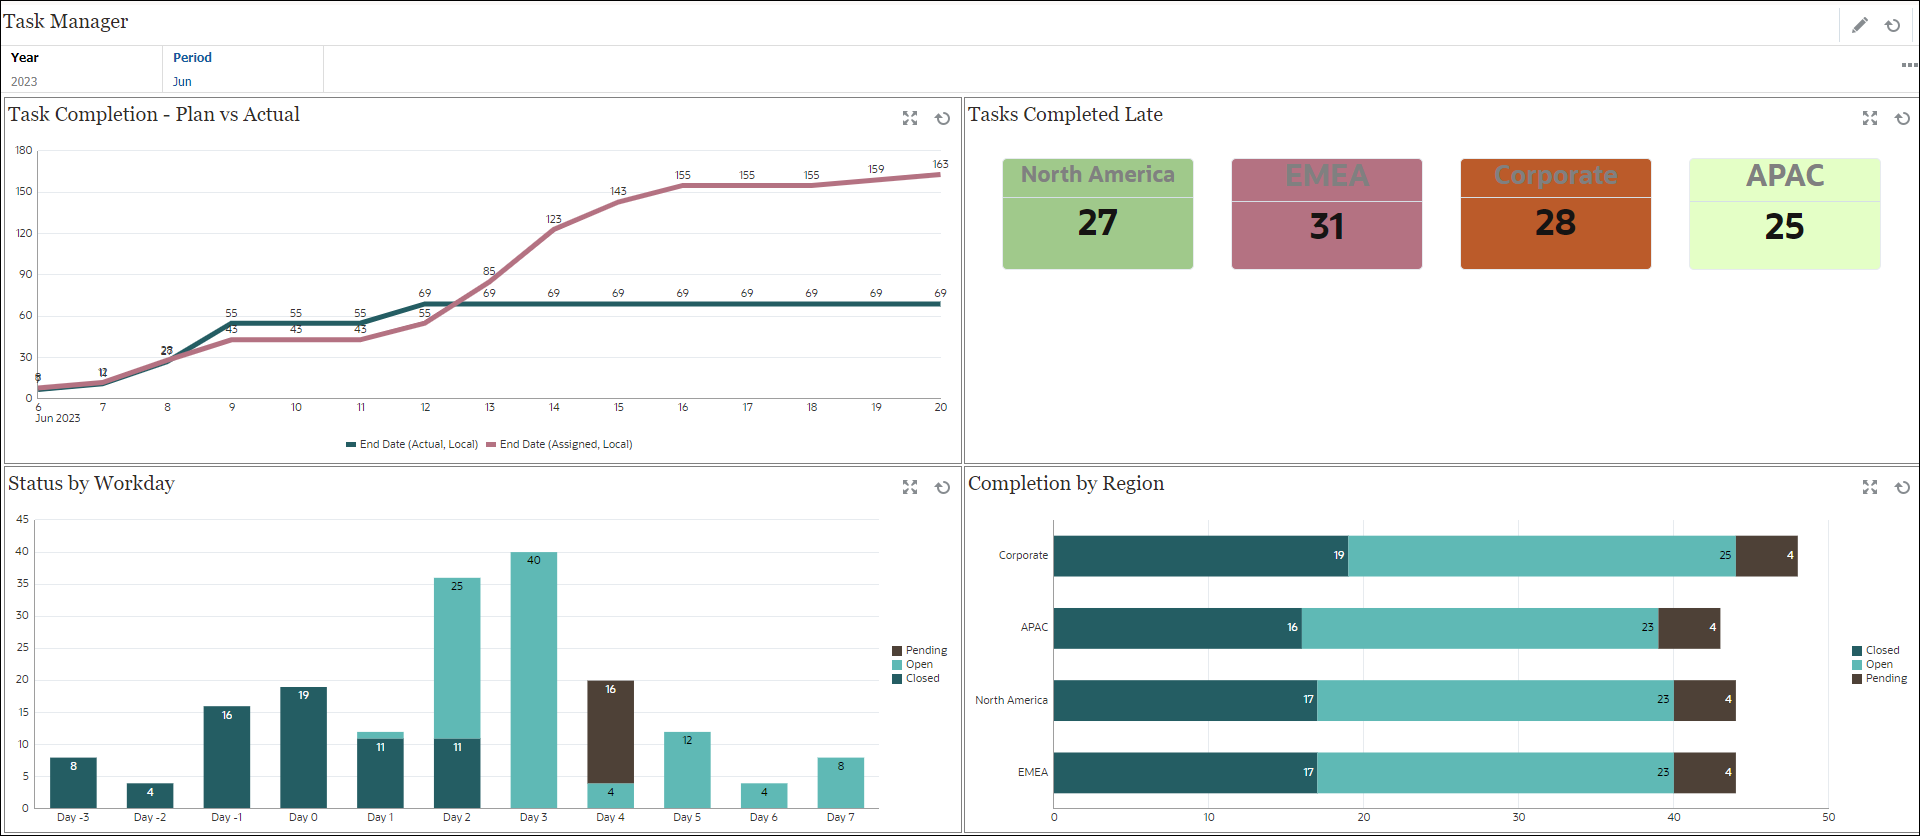 Task Manager Operational Dashboard